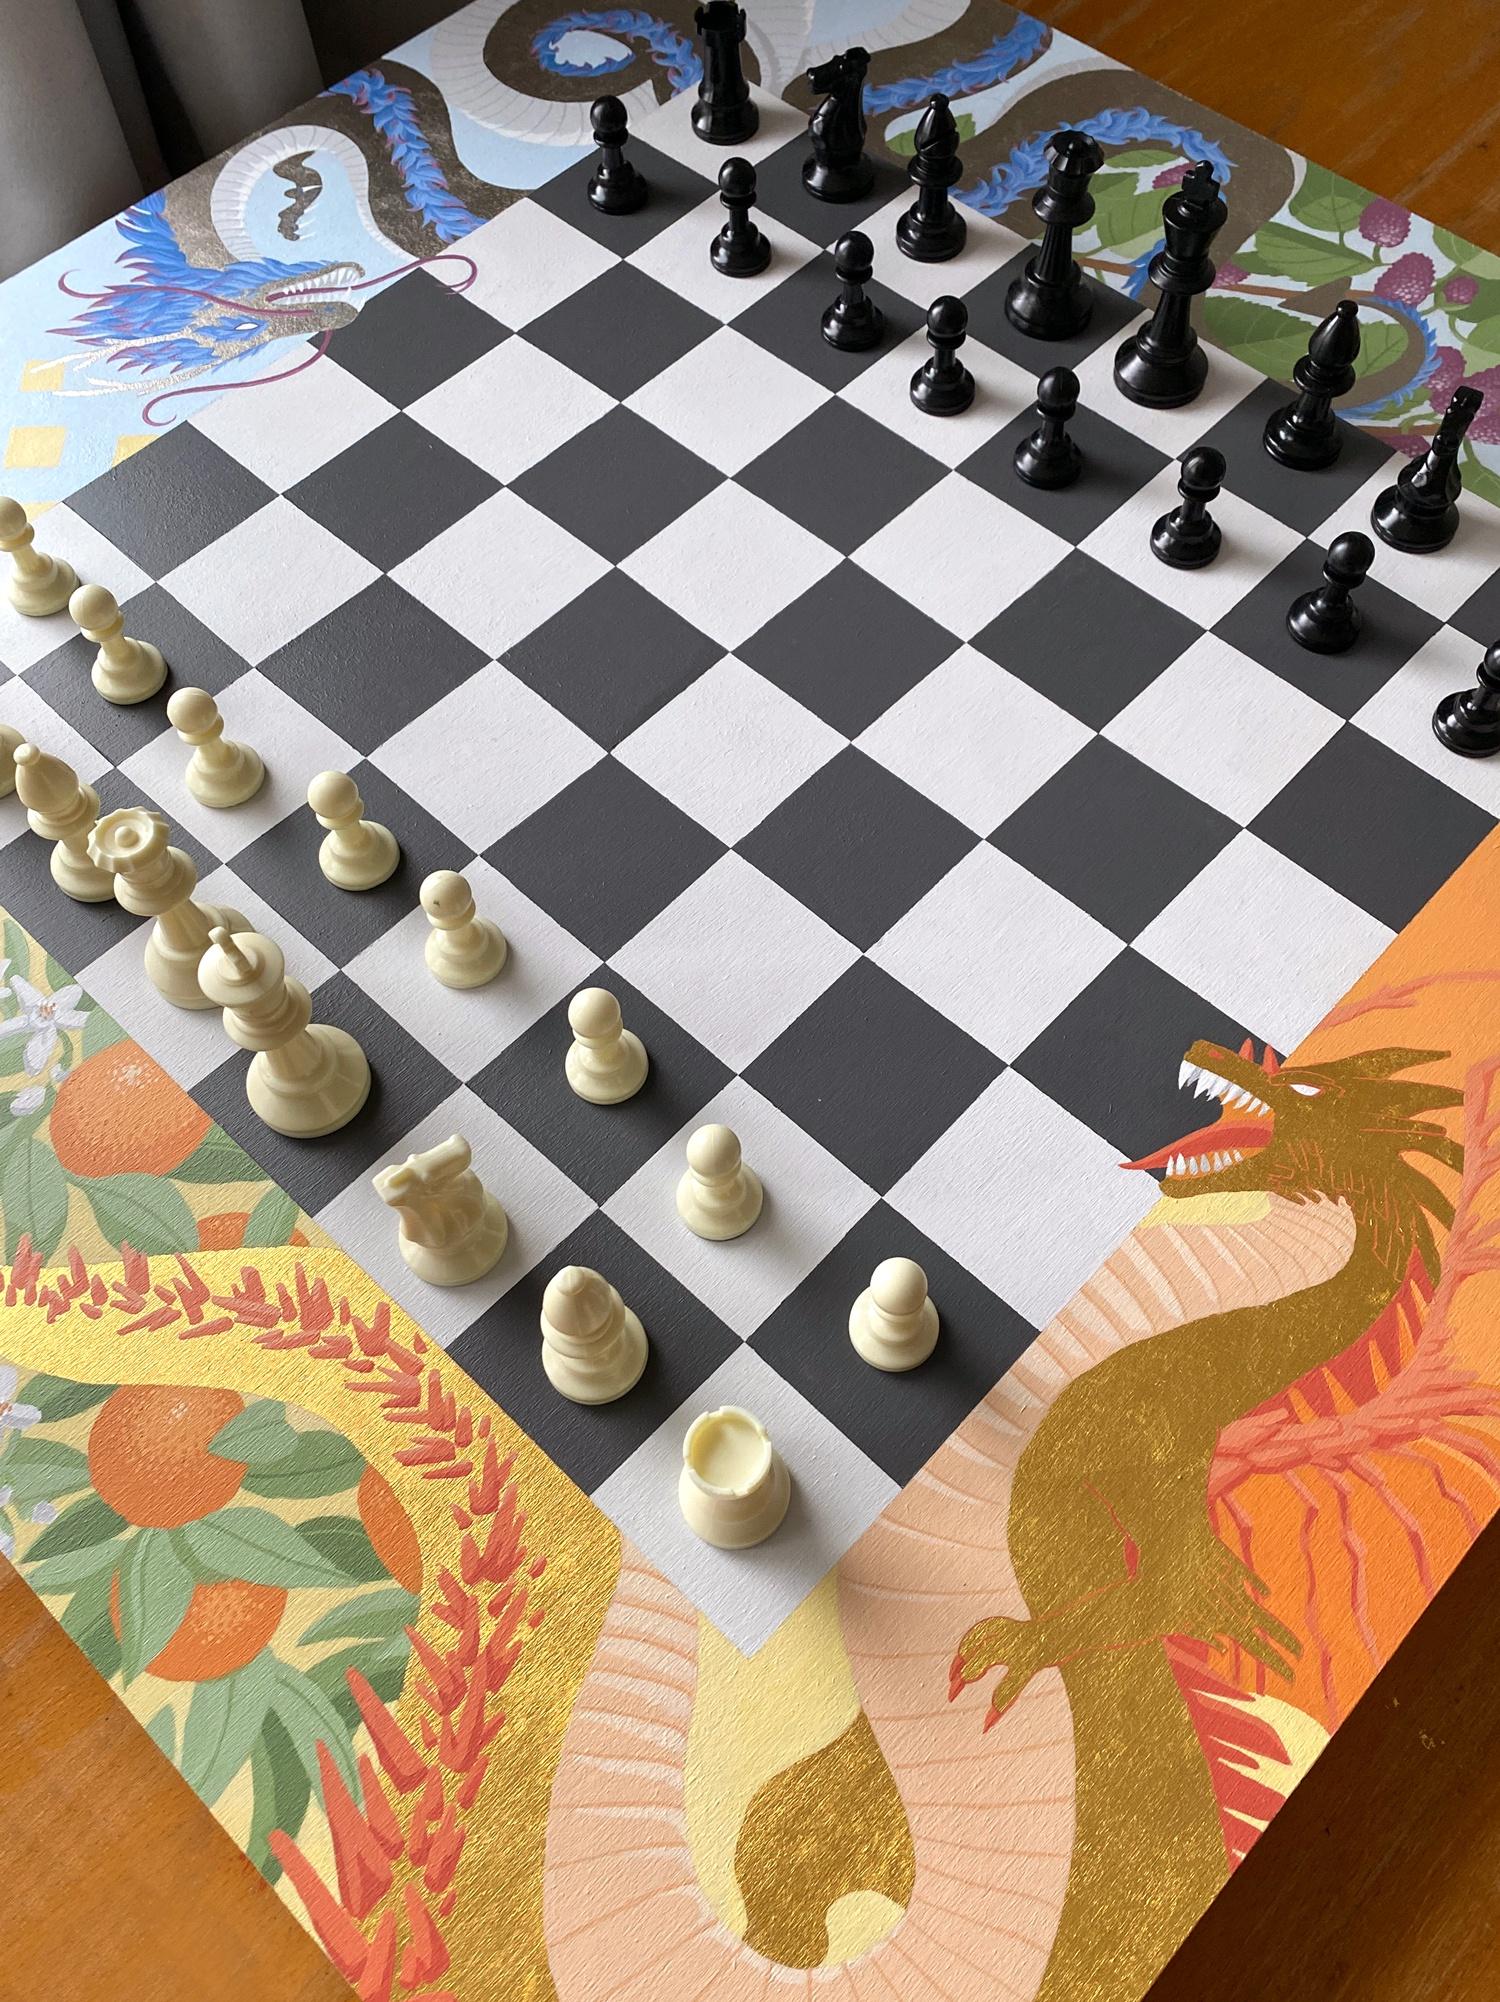 I painted a dragon-themed chessboard.